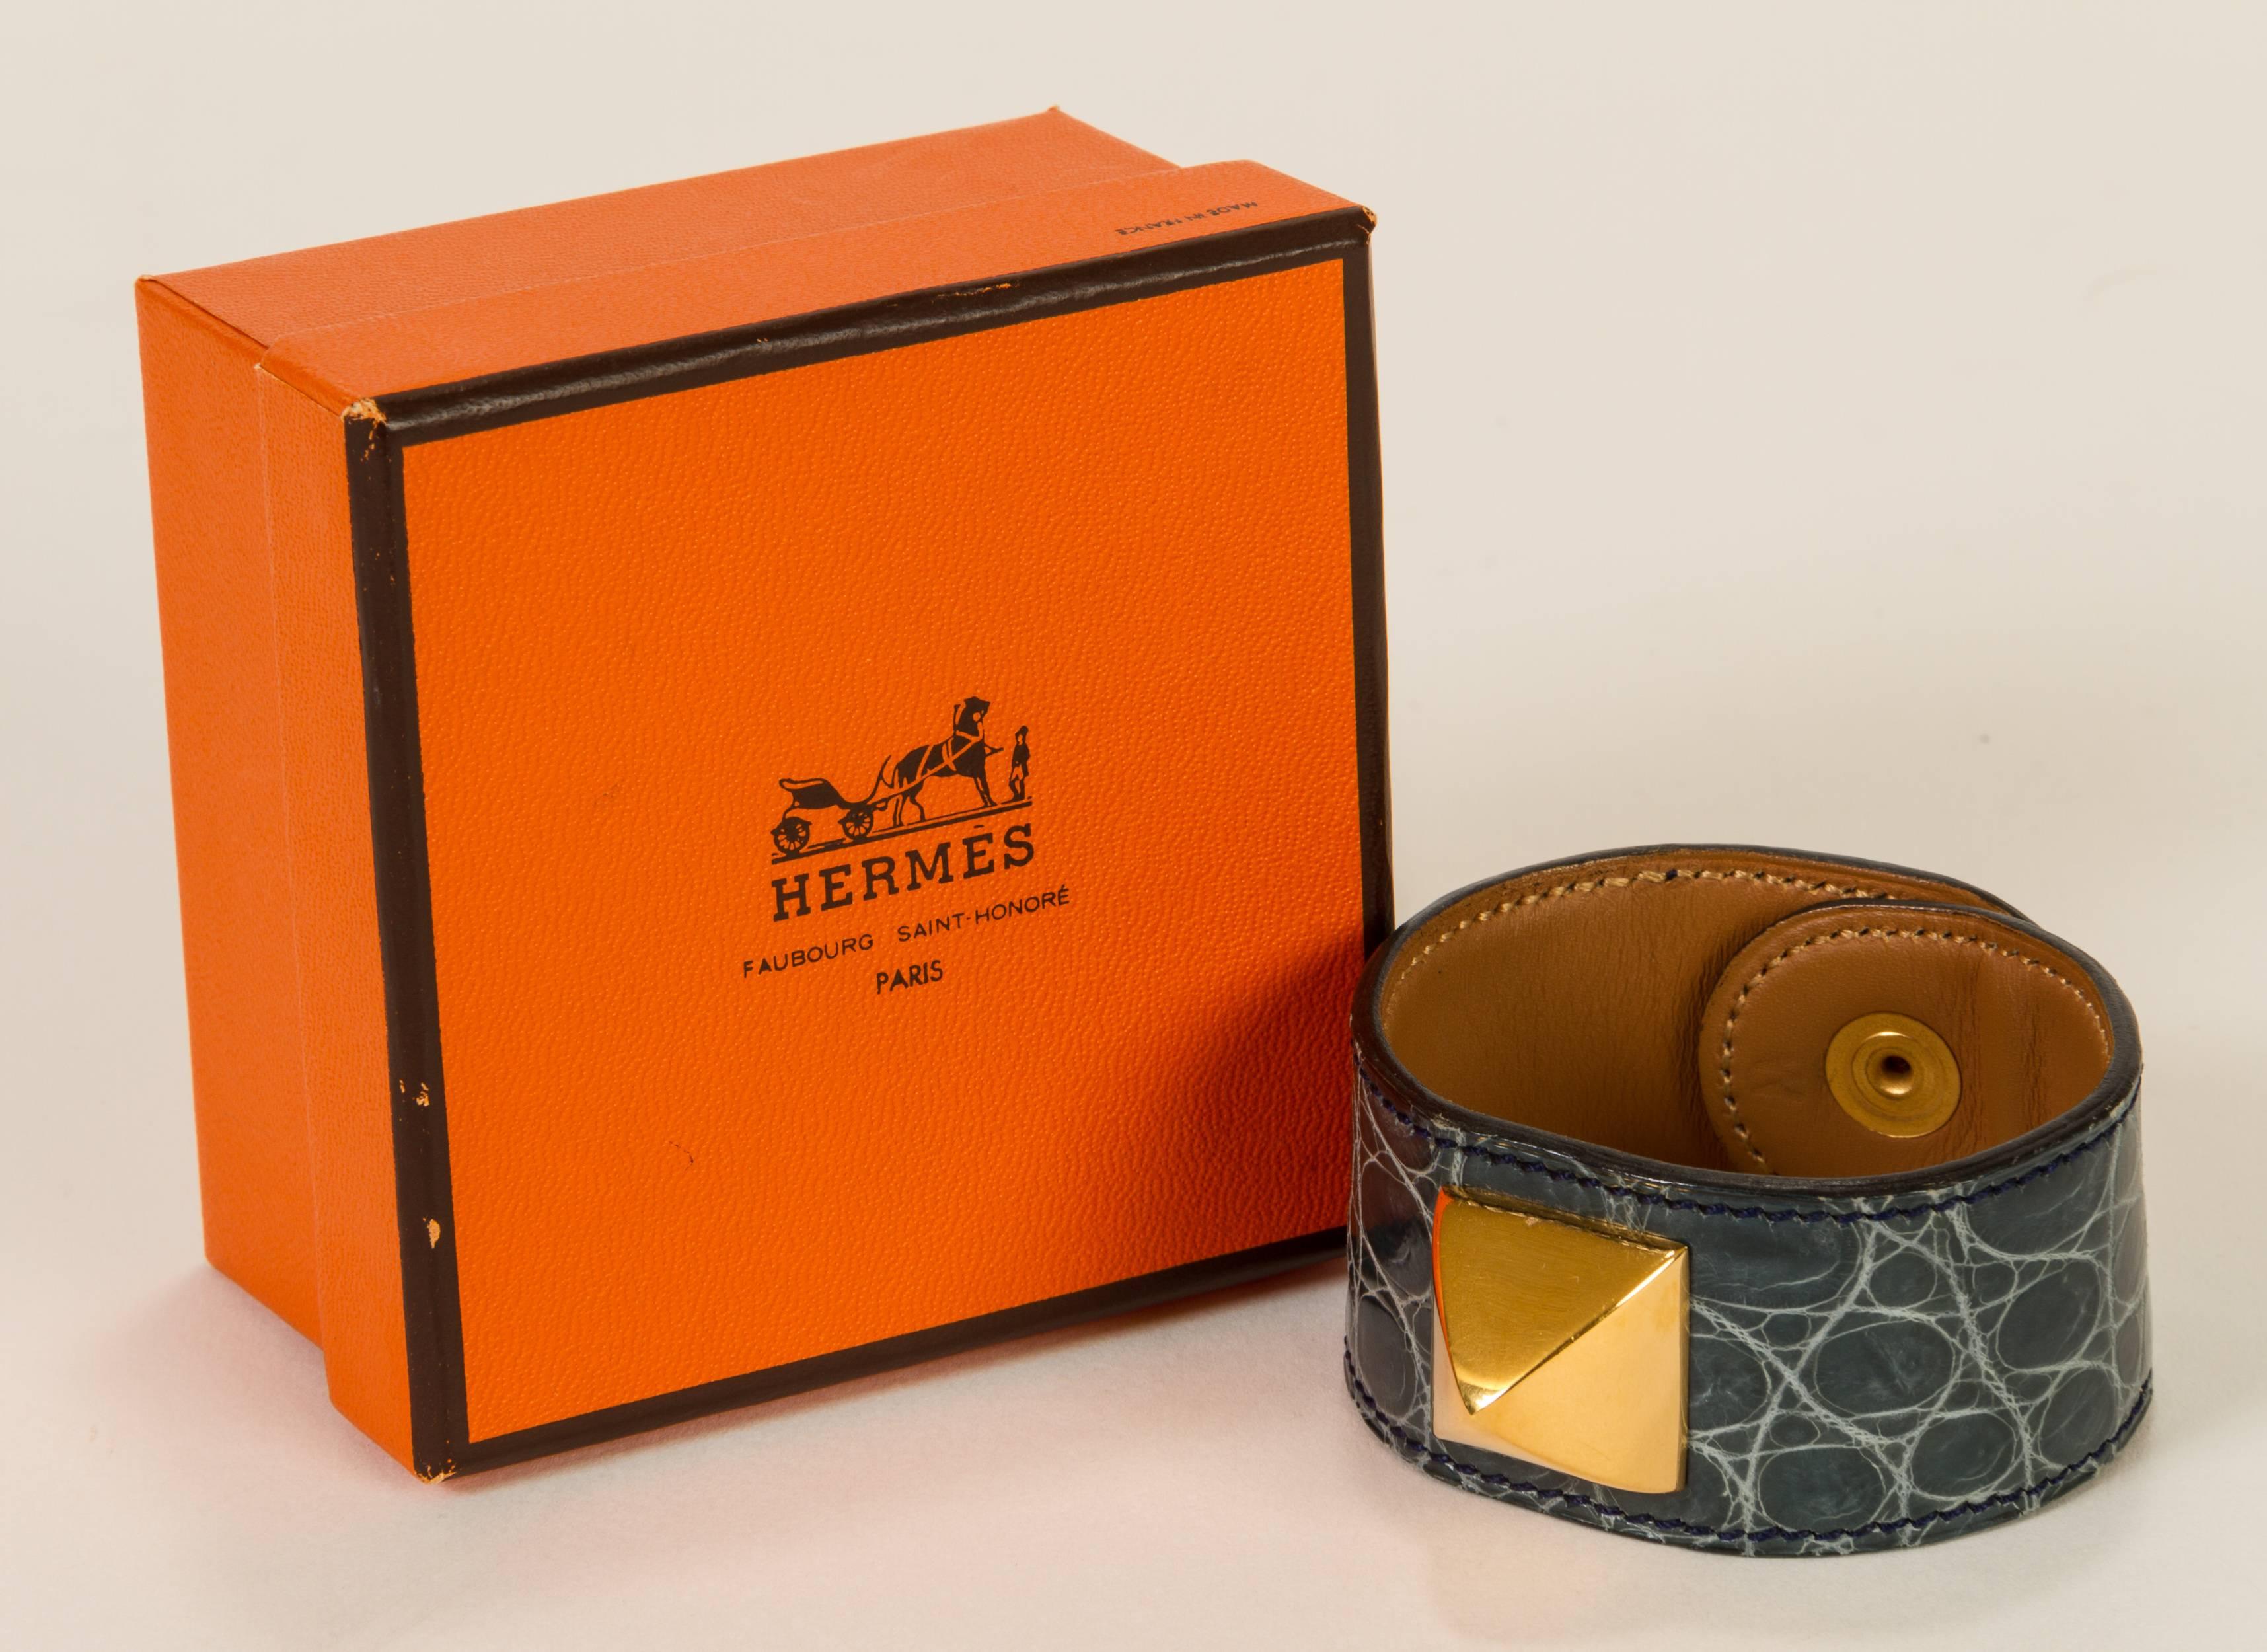 Hermès Medor bracelet with snap clasp, 1993. Made with crocodile leather, in excellent condition. Size W. Comes with original box.